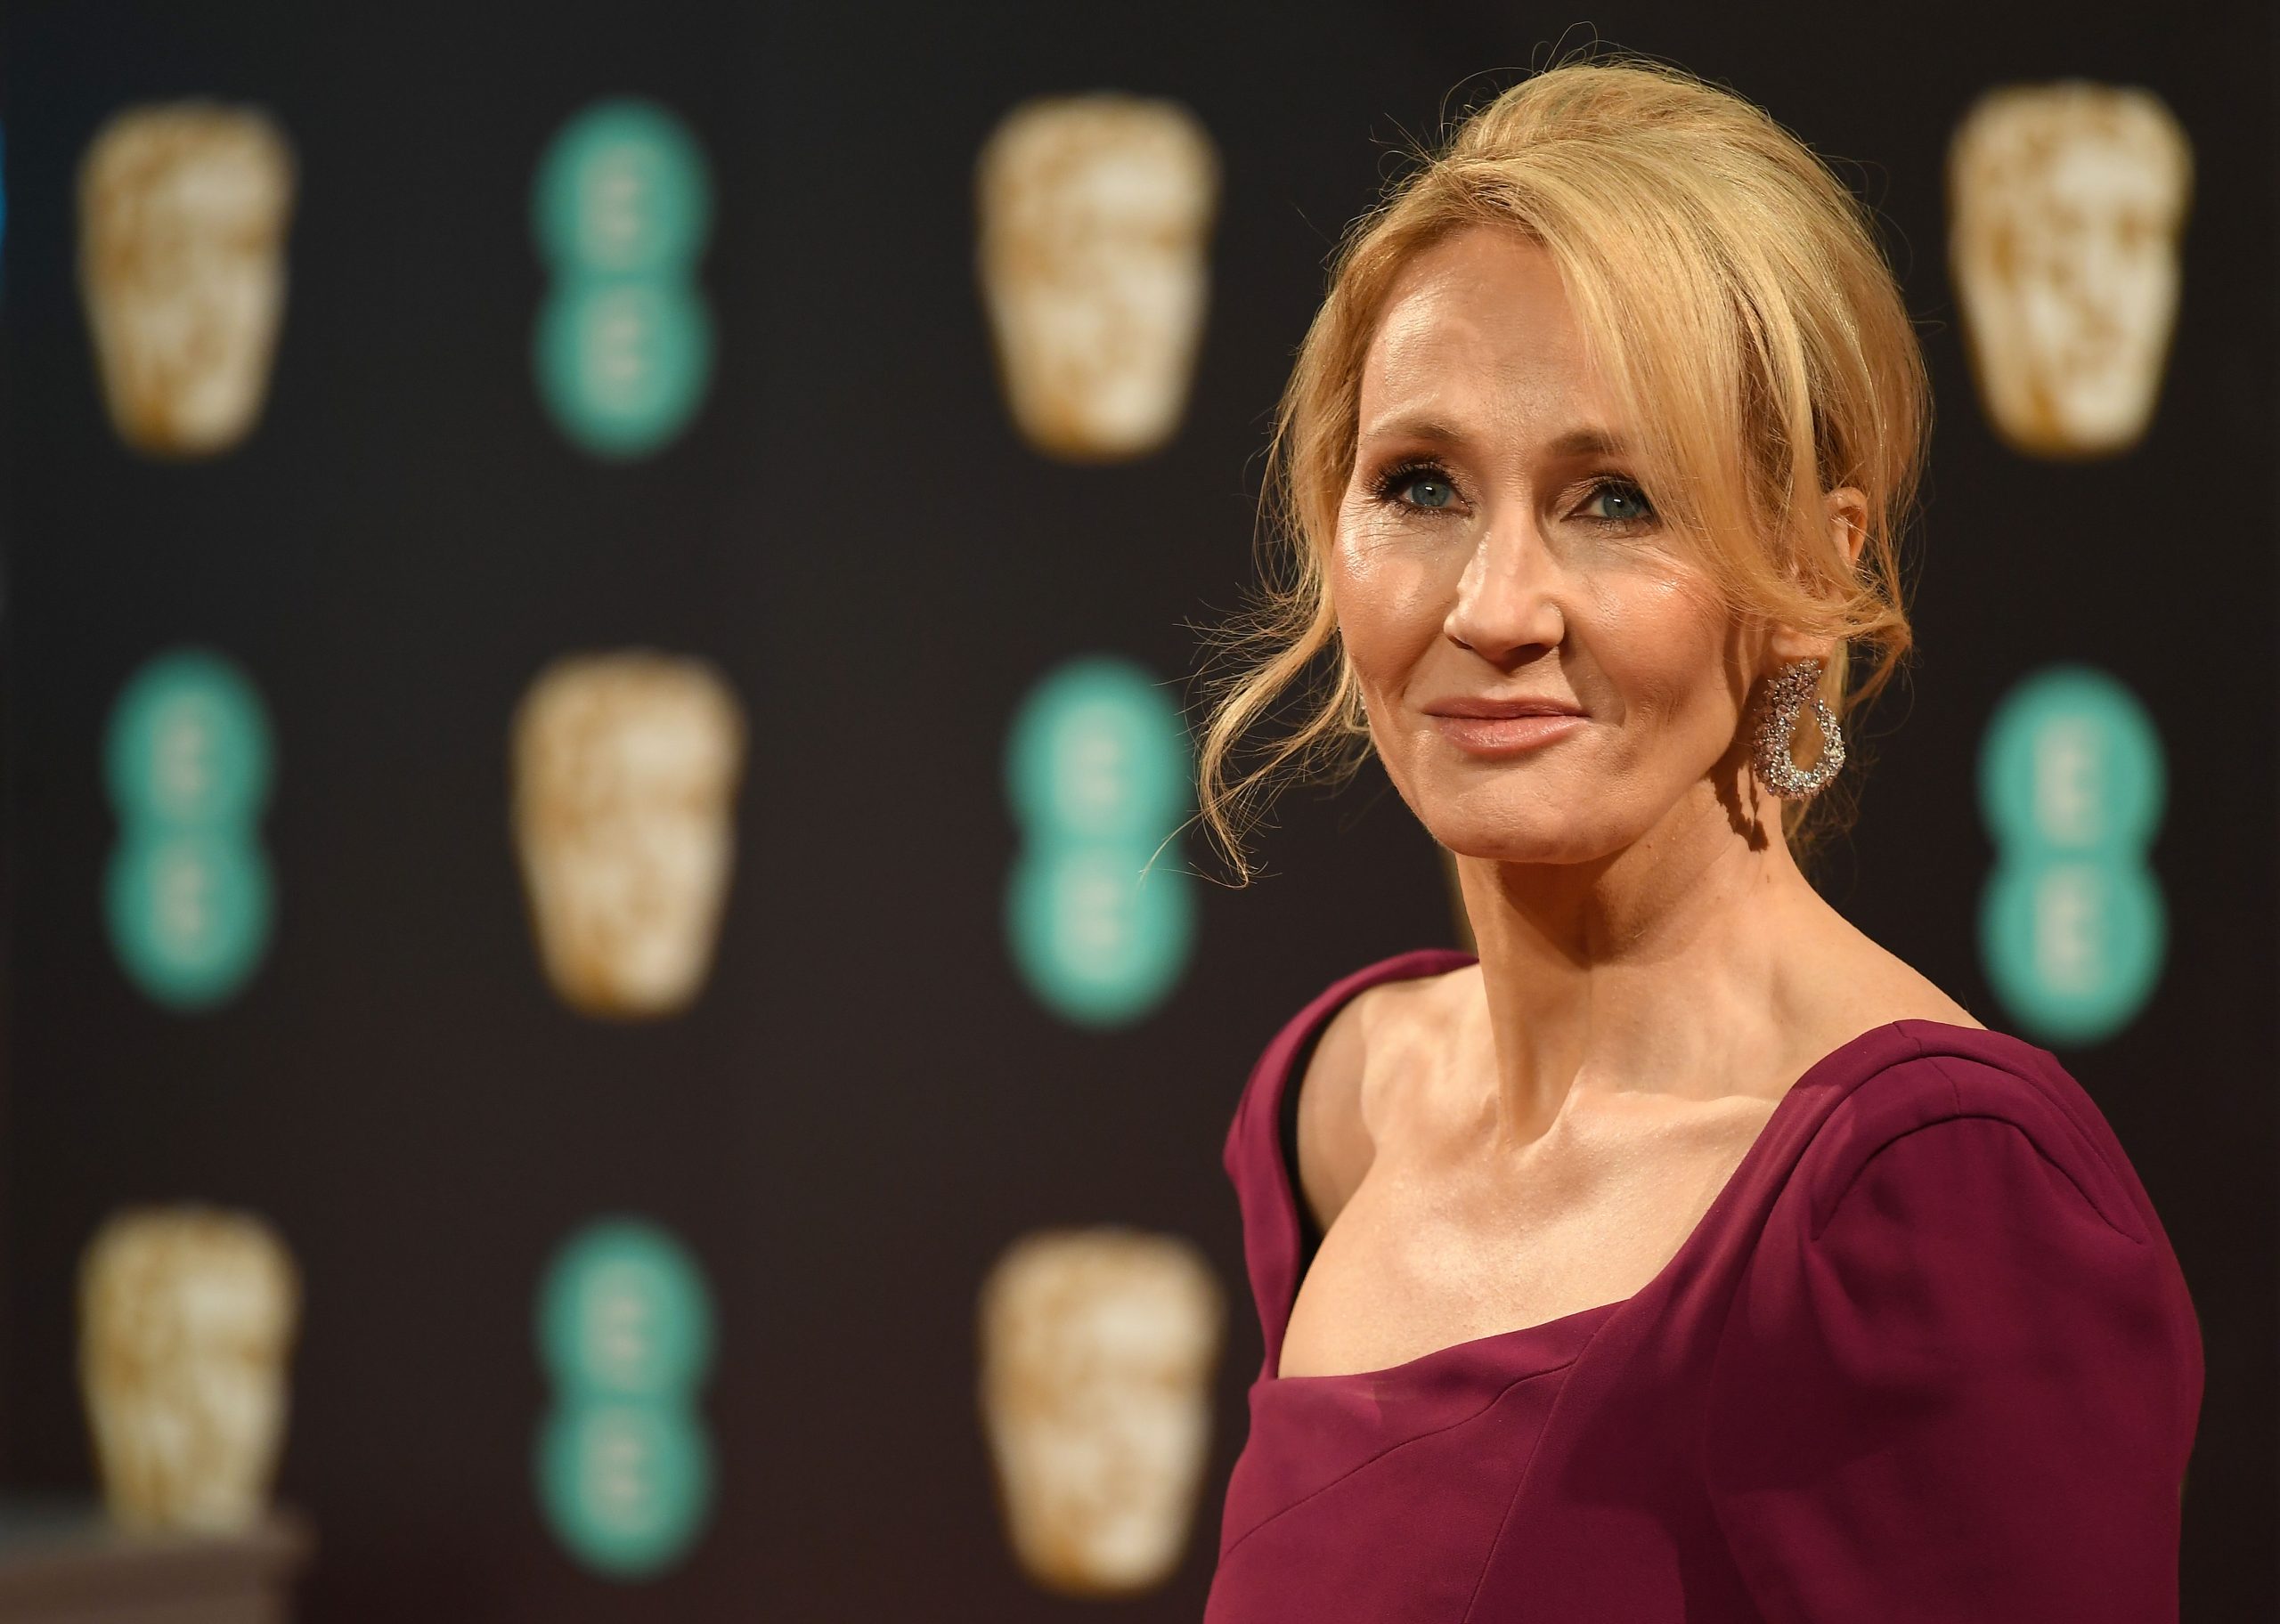 JK Rowling’s new book on toxic fandom’s backlash not based on author’s life